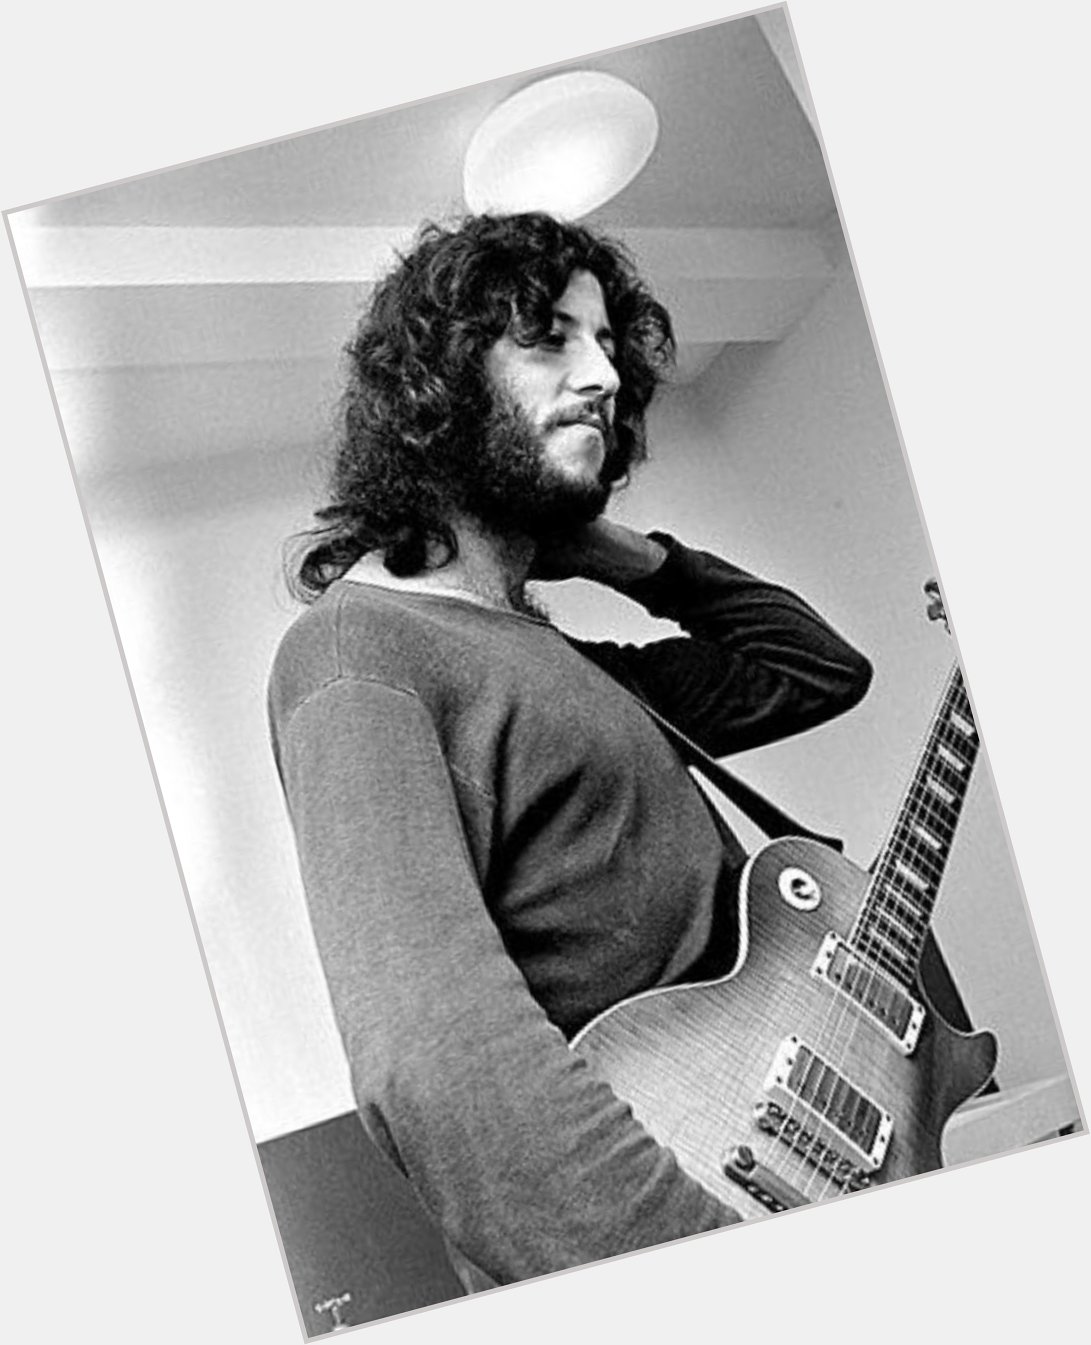 Happy Birthday to Peter Green The man who started it all! Born on this day in 1946 